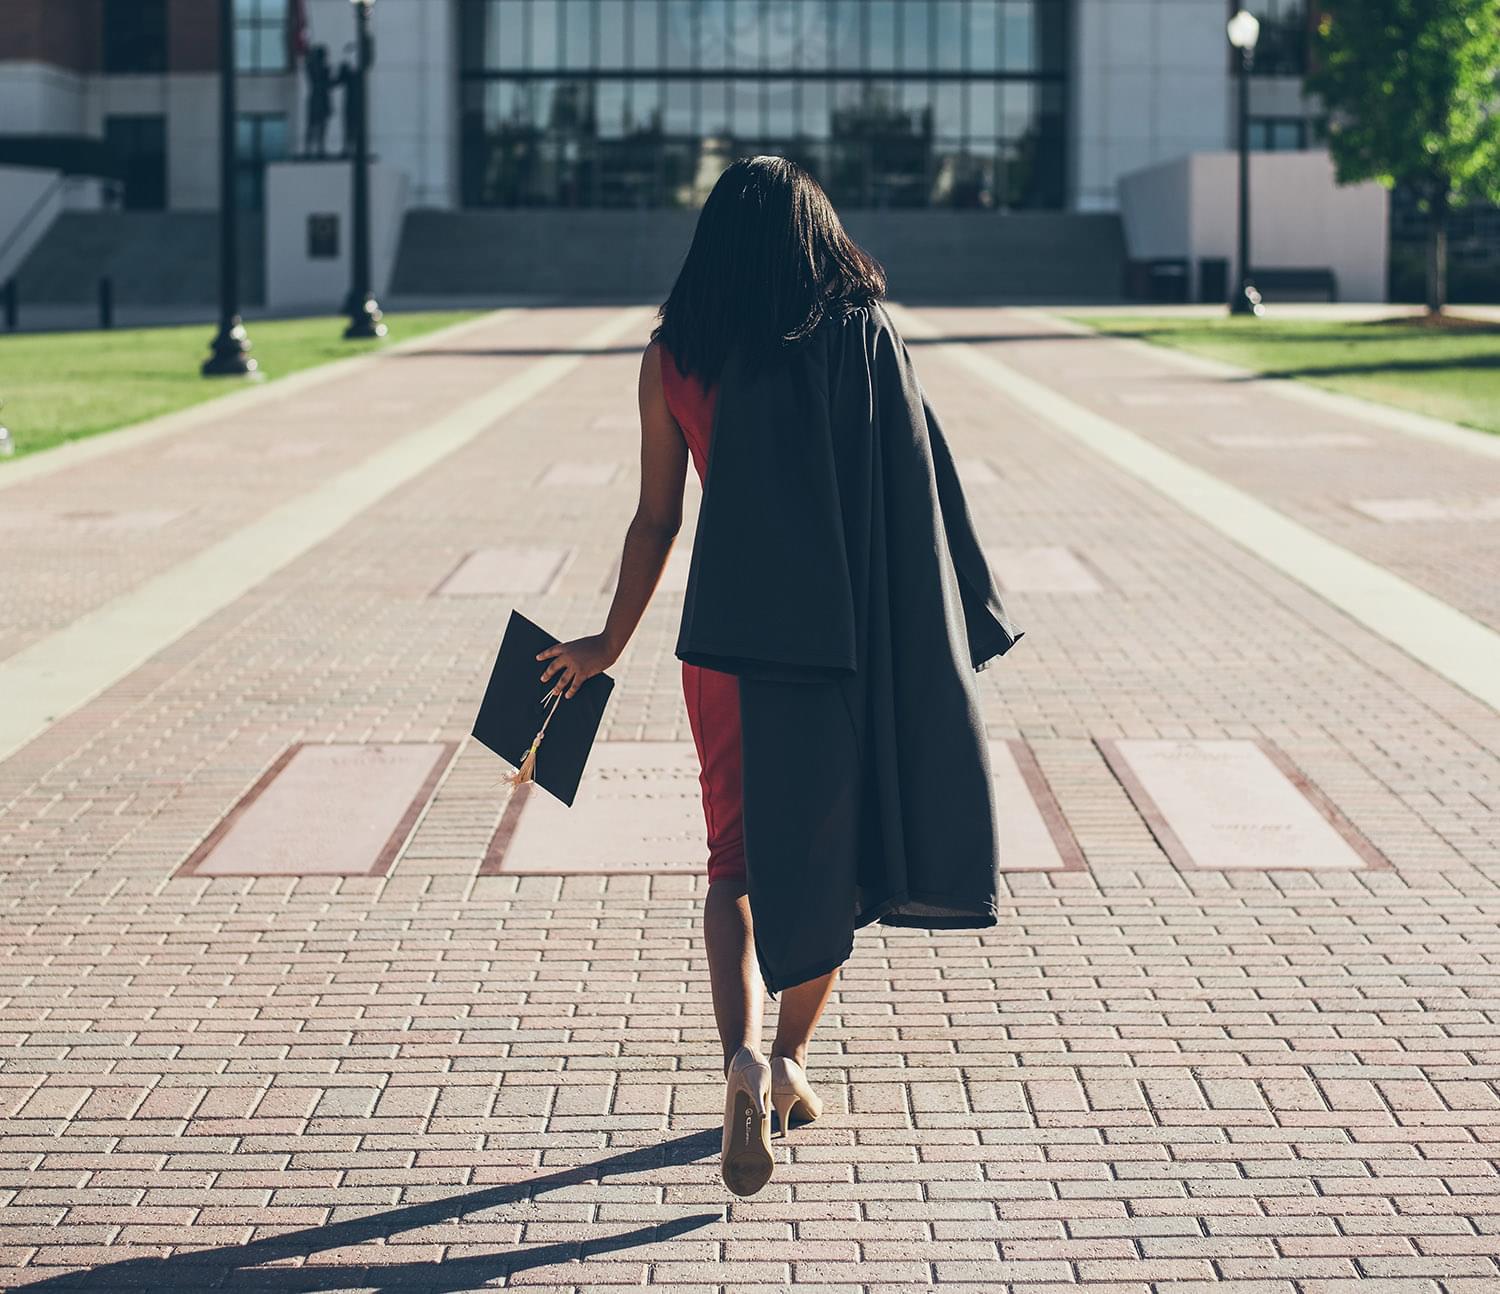 Recent graduate walking on campus with graduation cap and gown